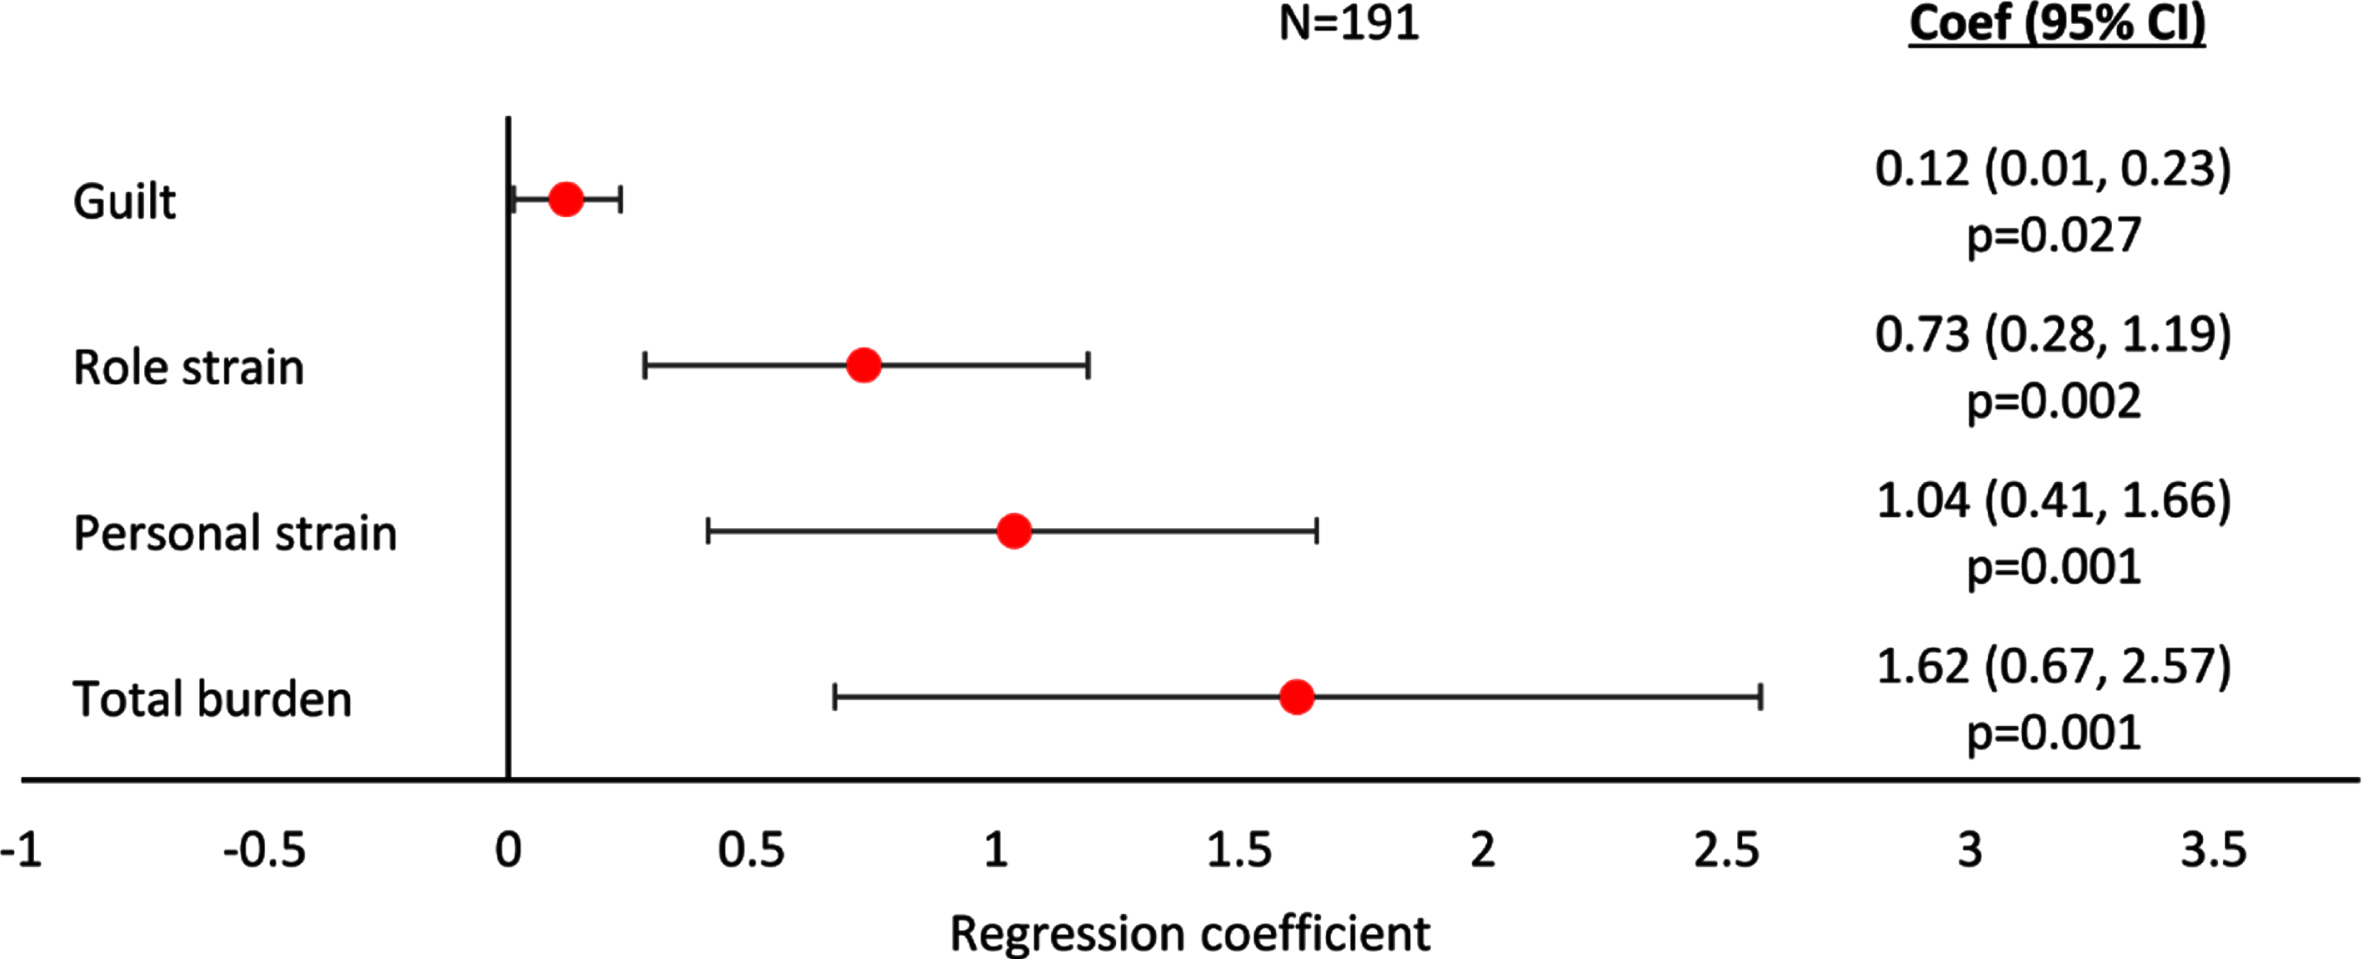 Linear regression analysis of caregiver burden assessed with ZBI by agitation score –all patients. A regression coefficient significantly different from 0 indicates the predicted outcomes differs significantly for different agitation scores; a coef > 0 implies a worse outcome with higher agitation scores, a coef < 0 implies a better outcome with higher agitation scores. All regressions were controlled for patient demographics (age and sex) and clinical characteristics (time since diagnosis, current MMSE score). Coef, coefficient; CI, confidence interval; MMSE, Mini-Mental State Examination; ZBI, Zarit Burden Interview.